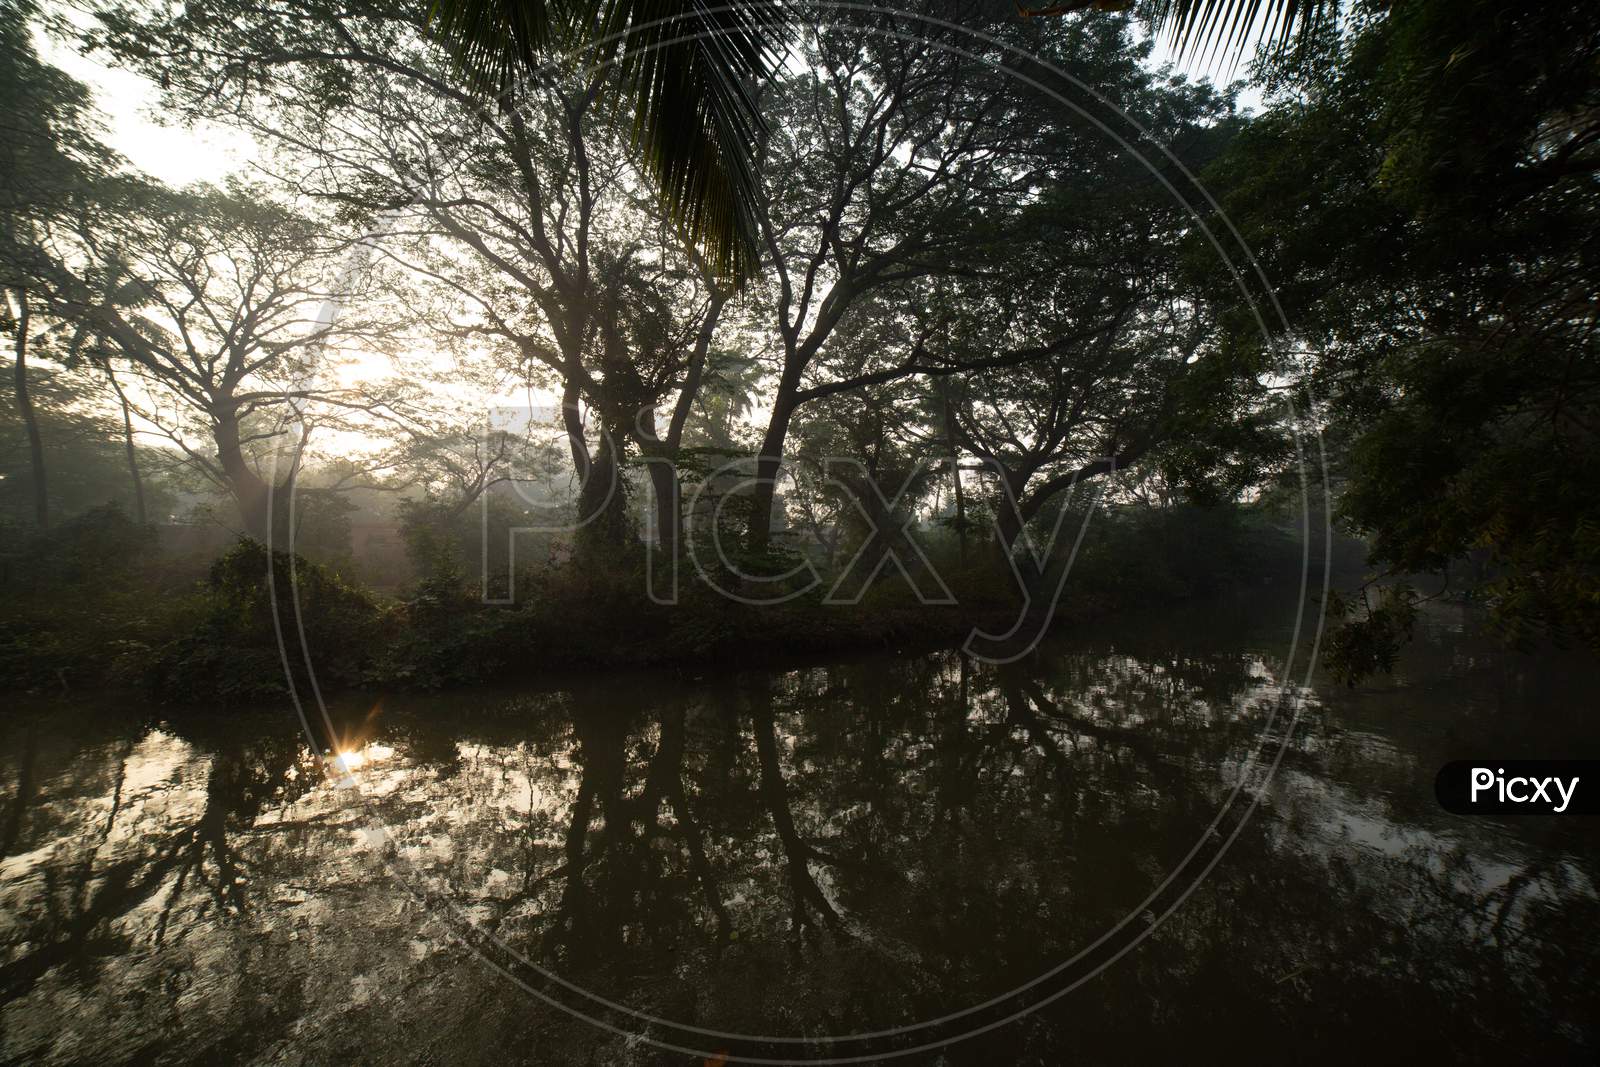 Canopy Of Trees With  Reflection  On Water Surface On an Winter Morning In Rural Village Outskirts